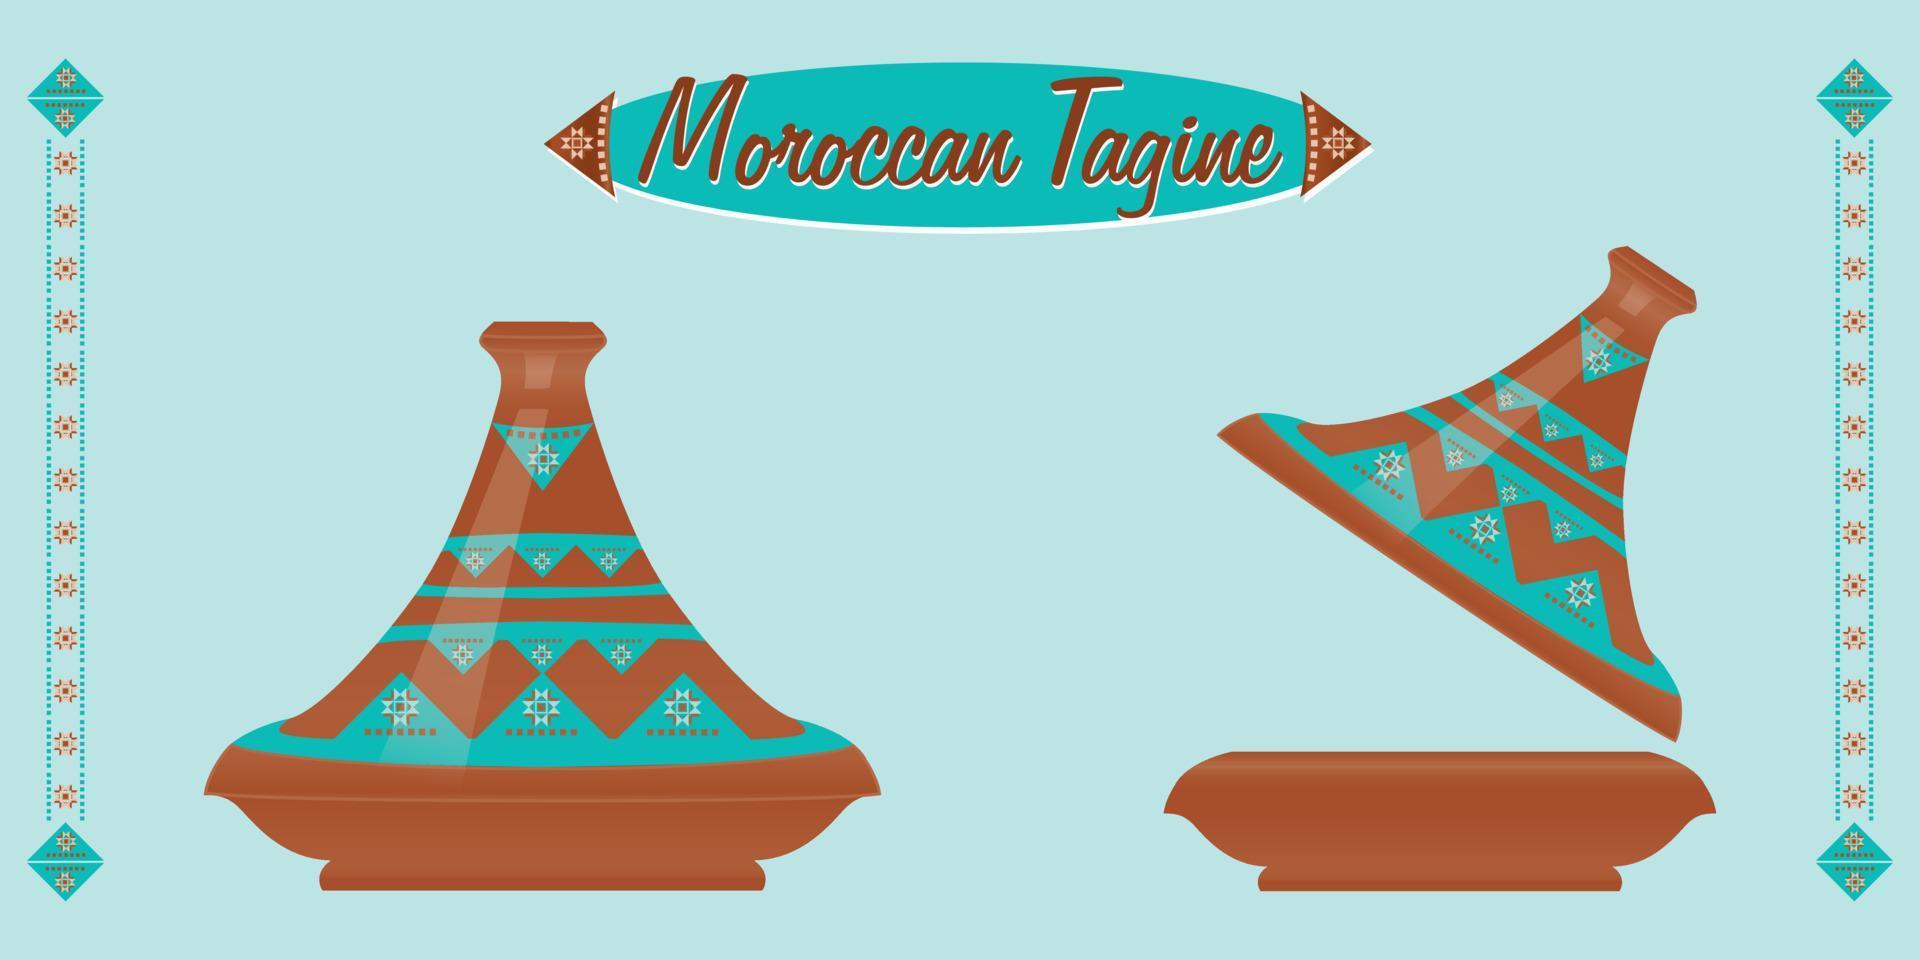 Moroccan Tagine, ceramic pot. Tajine is one of the most famous kitchen utensils in the world. Moroccan dish. Vector illustration.